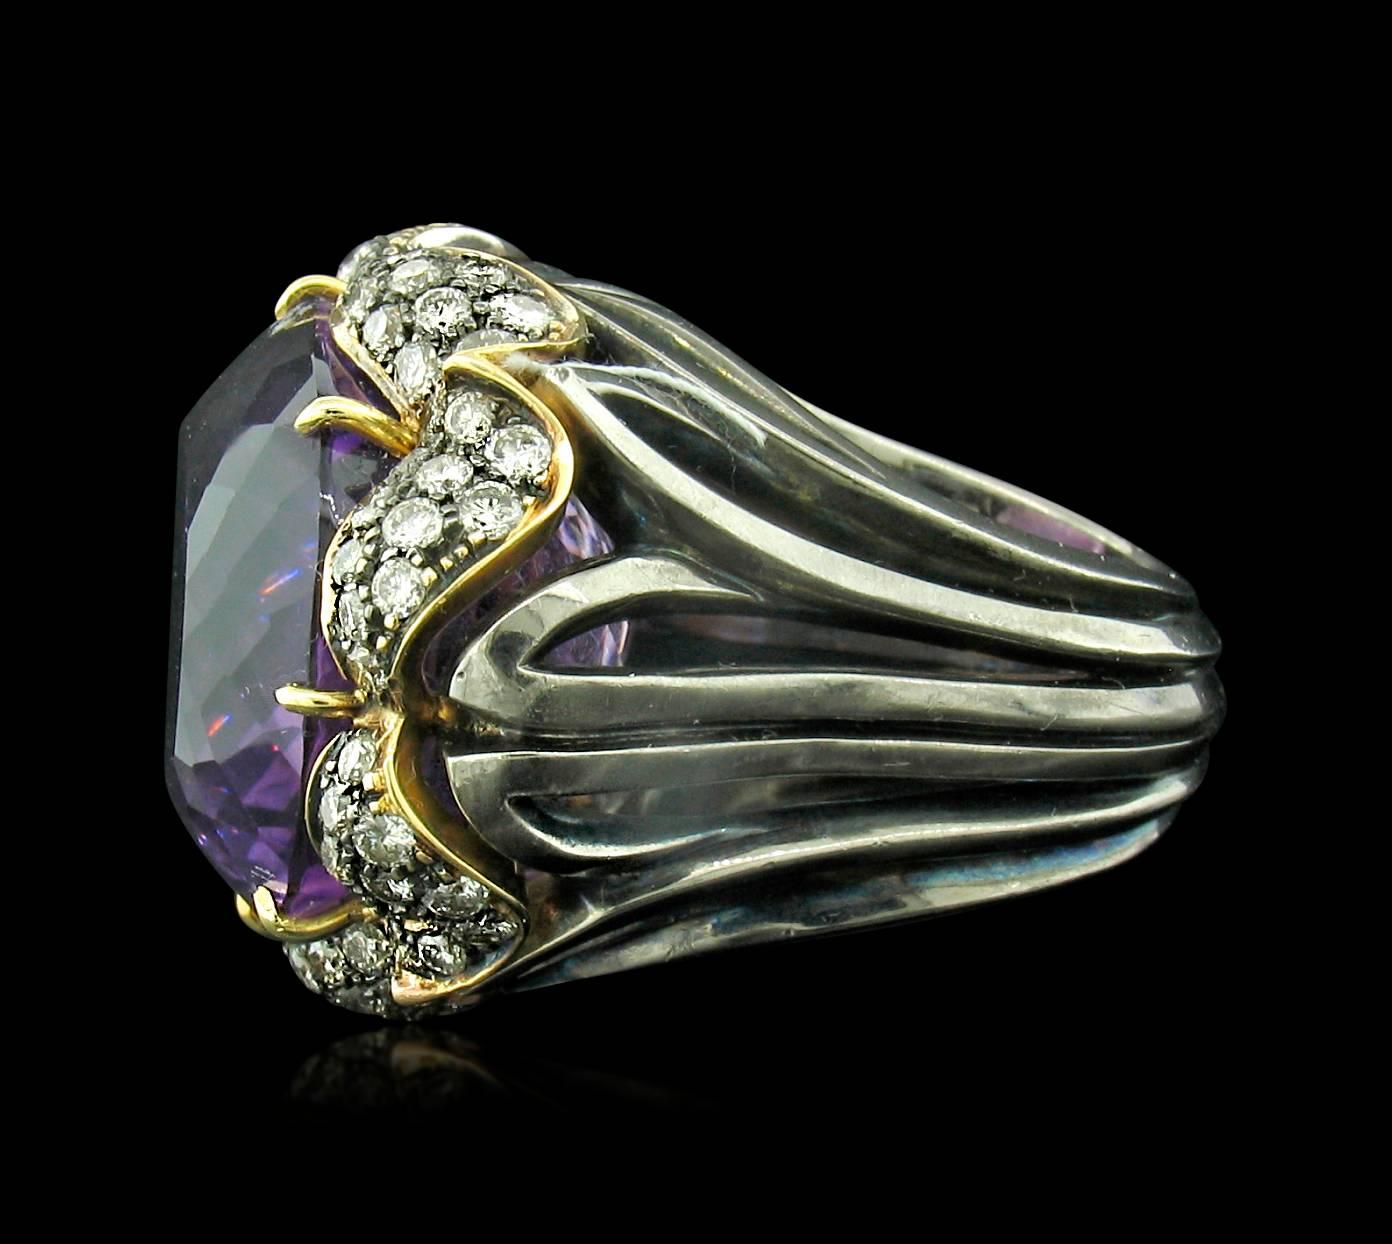 Tony Duquette Amethyst and Diamond Ring in 18K features a total Amethyst weight of 72 carats accented with Diamond pave.  Size 7 1/2.
**This ring may be resized to fit after purchase at no cost to the buyer.

Tony Duquette was a well-known painter,